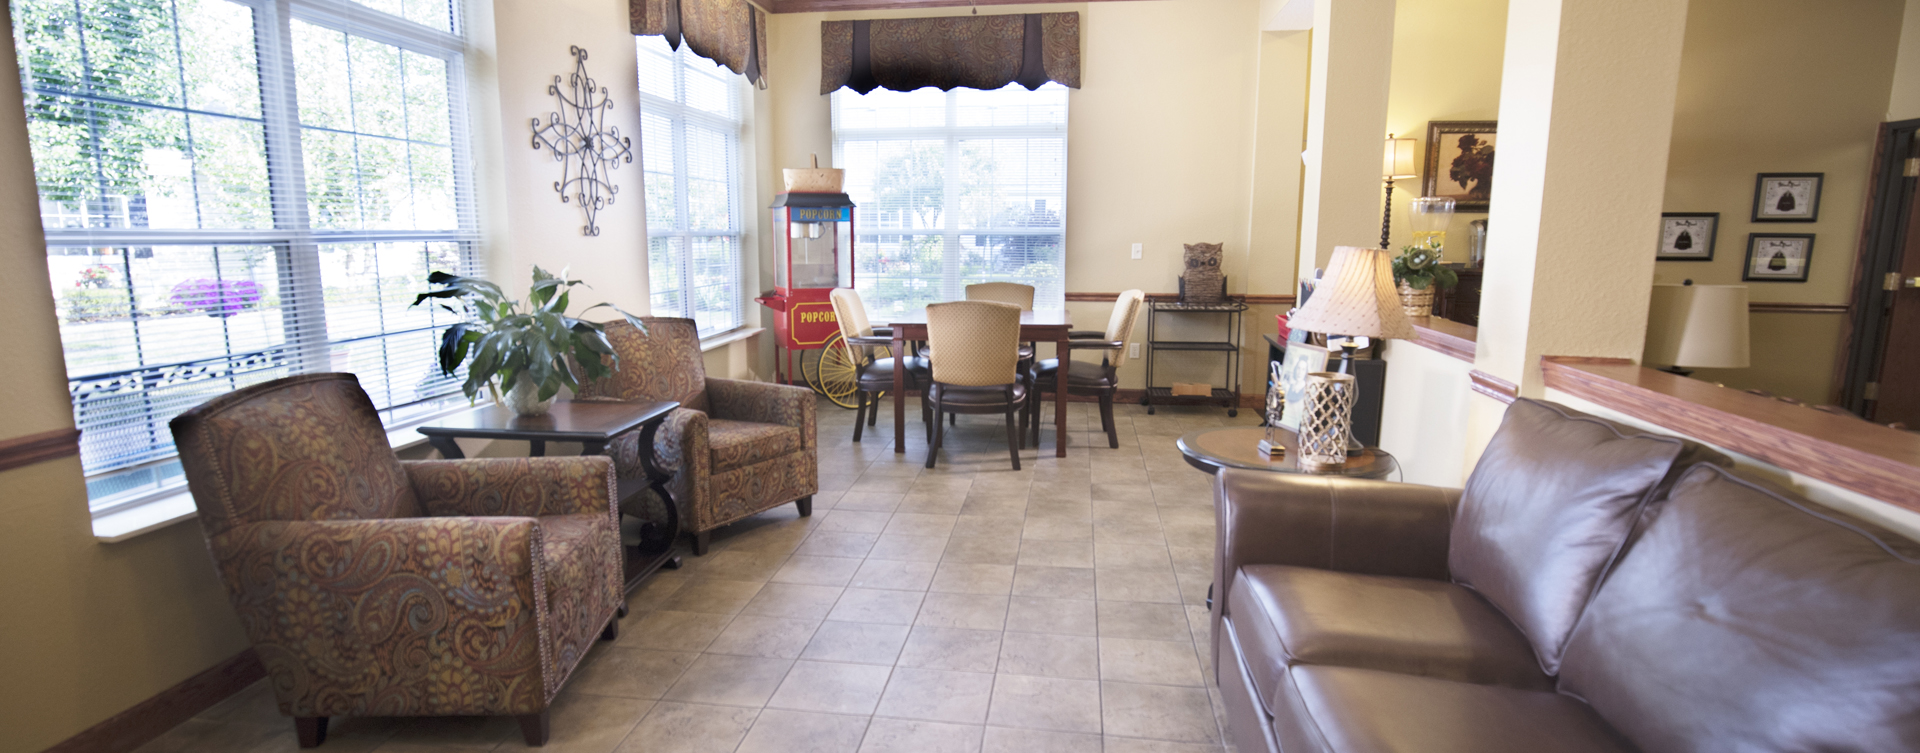 Relax in the warmth of the sunroom at Bickford of Quincy